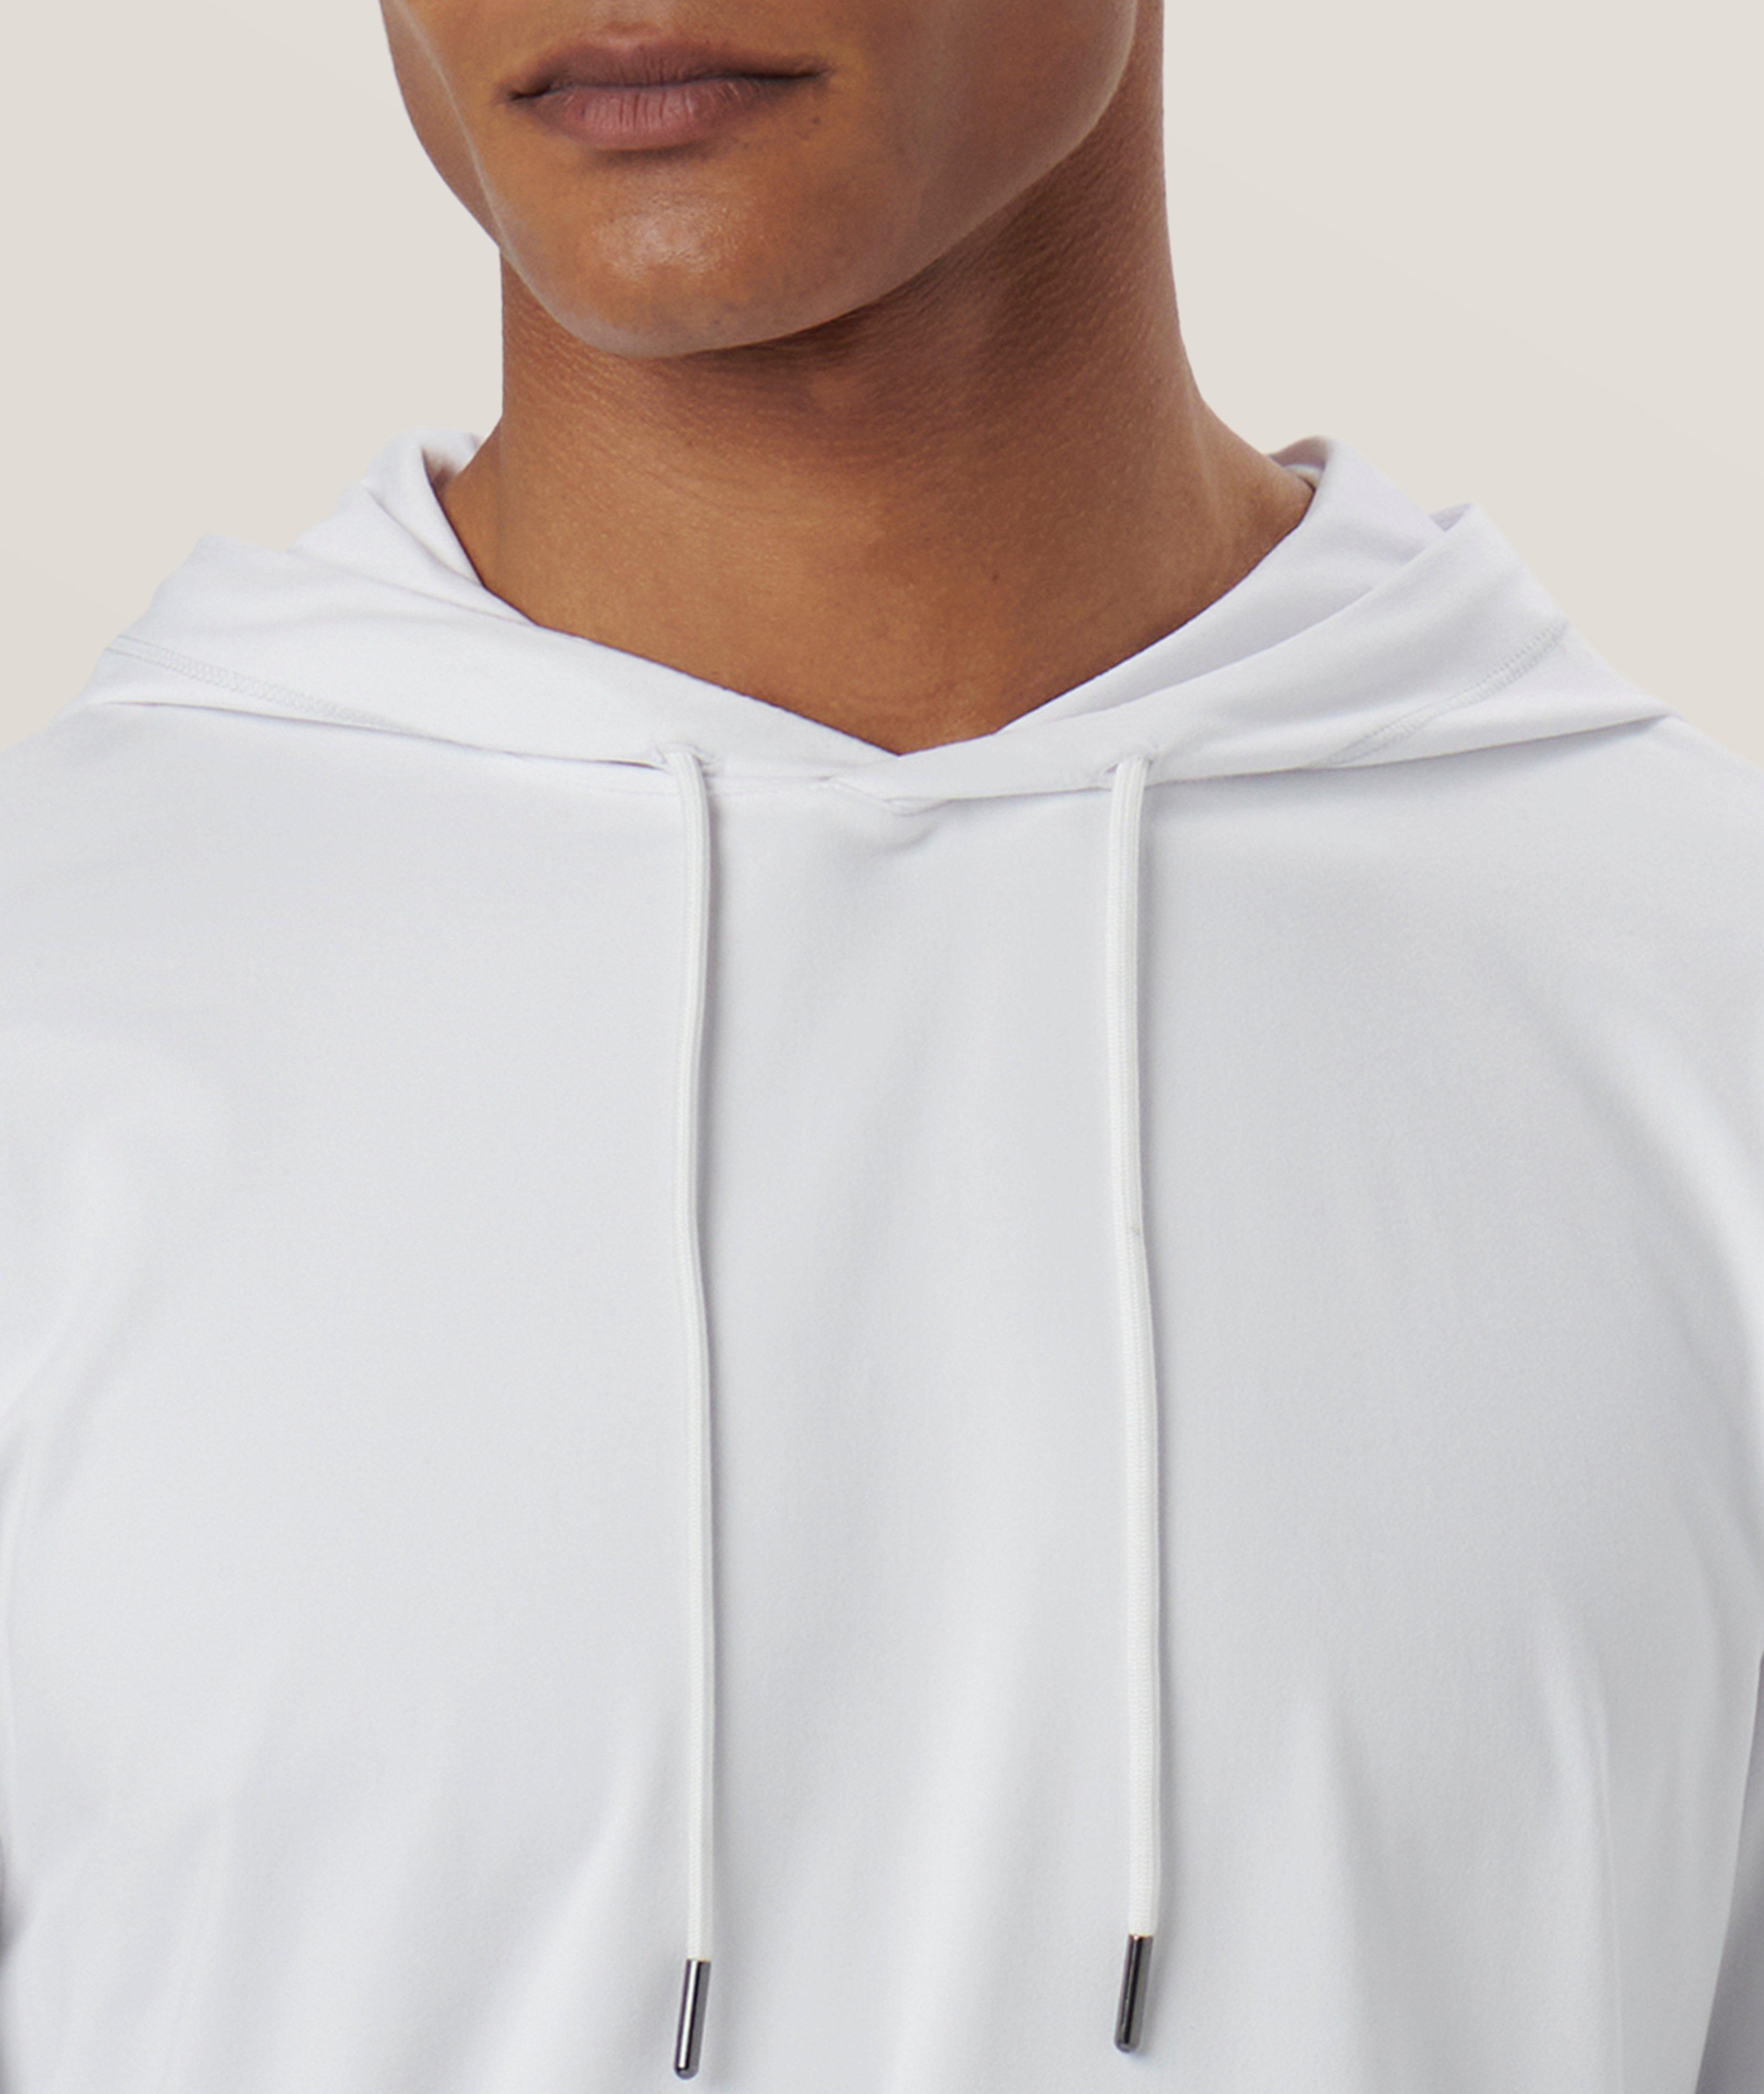 UV50 Performance Stretch-Fabric Hooded Sweater image 1